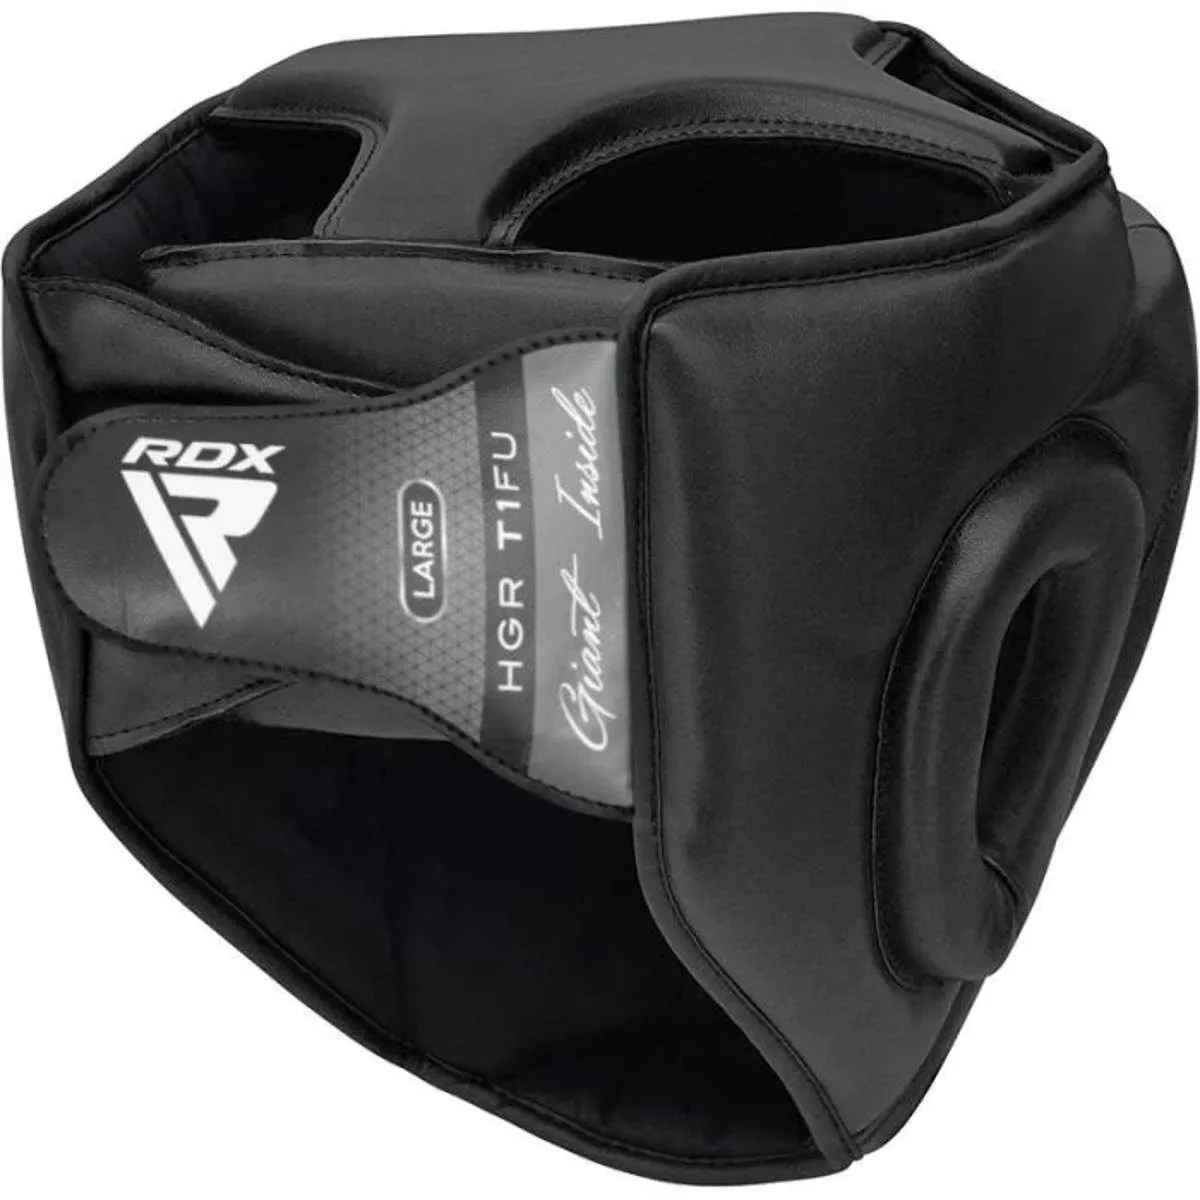 Head protection with grid black RDX